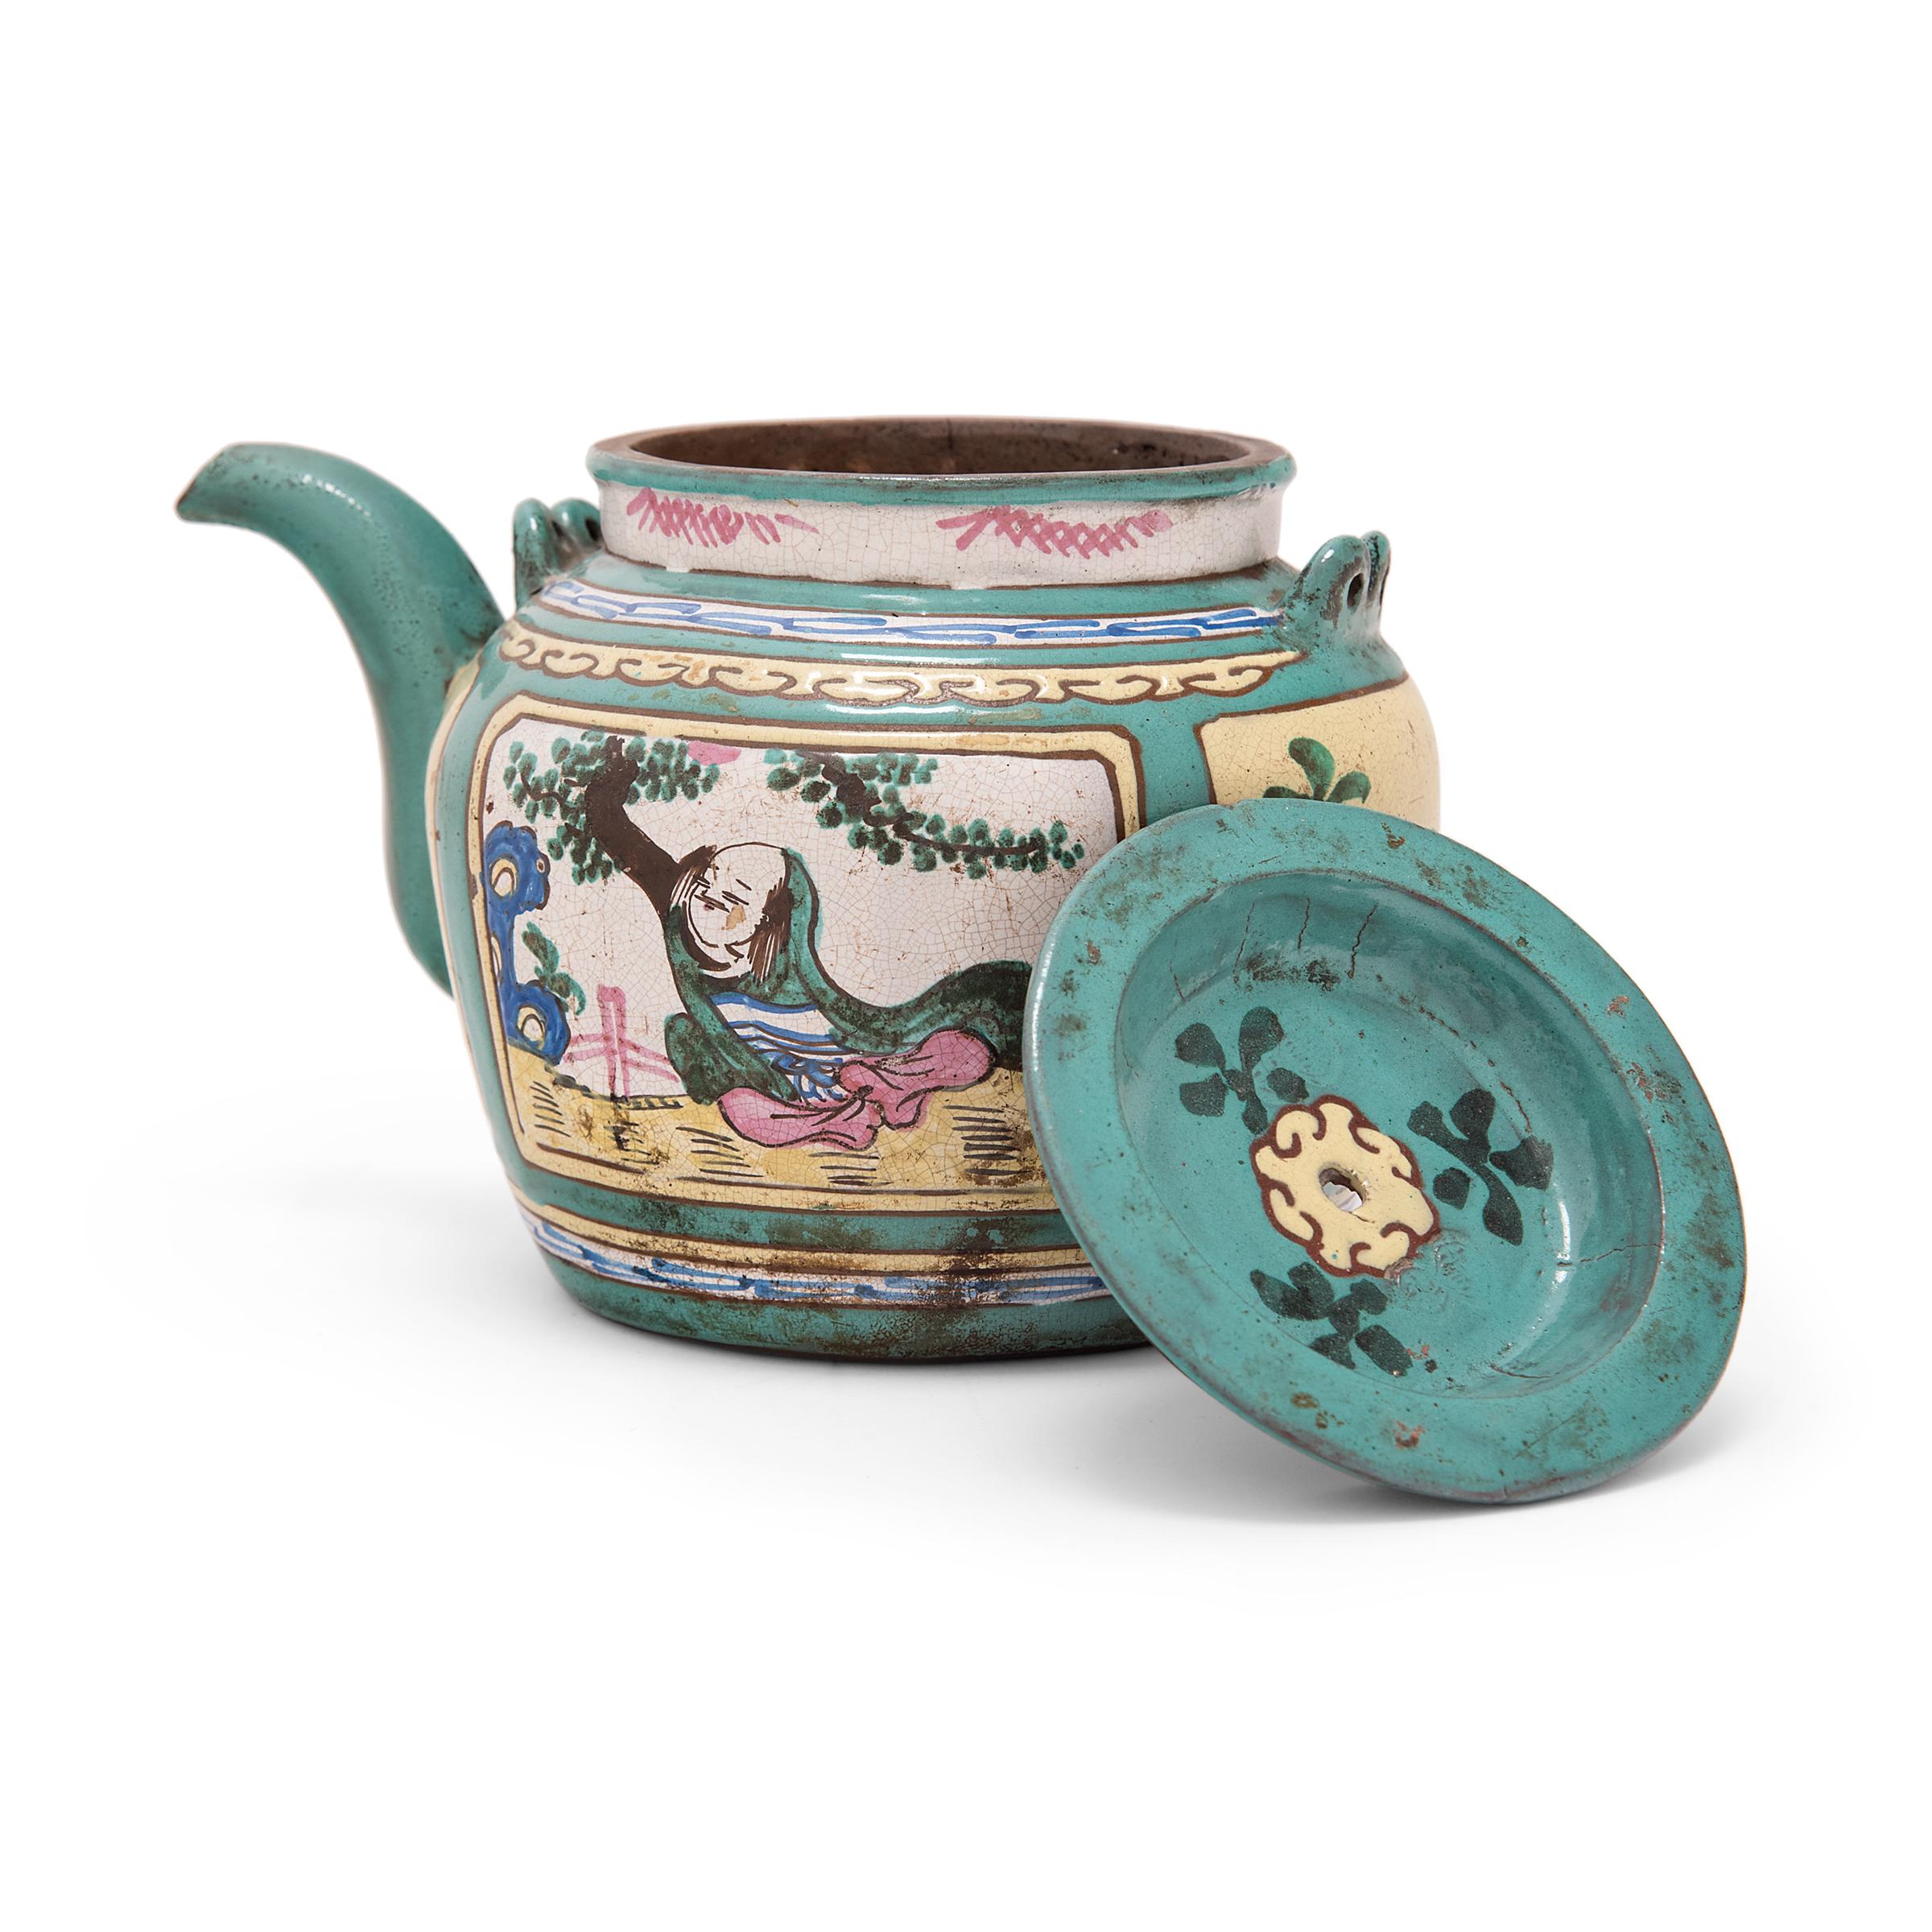 20th Century Chinese Turquoise Enamelware Teapot, c. 1900 For Sale